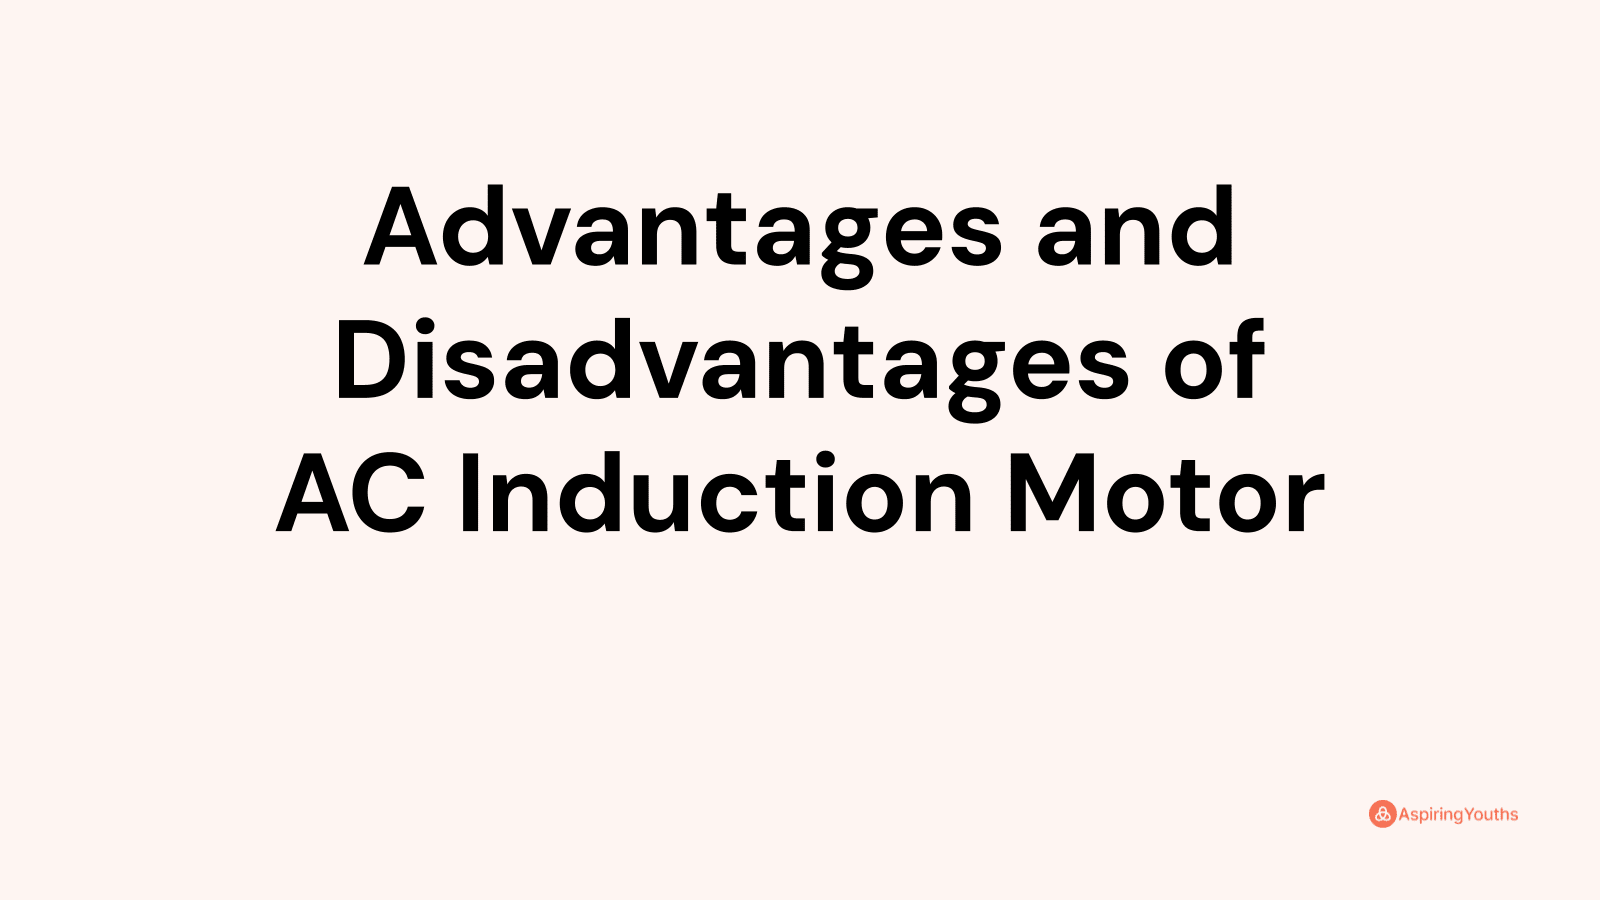 Advantages and disadvantages of AC Induction Motor